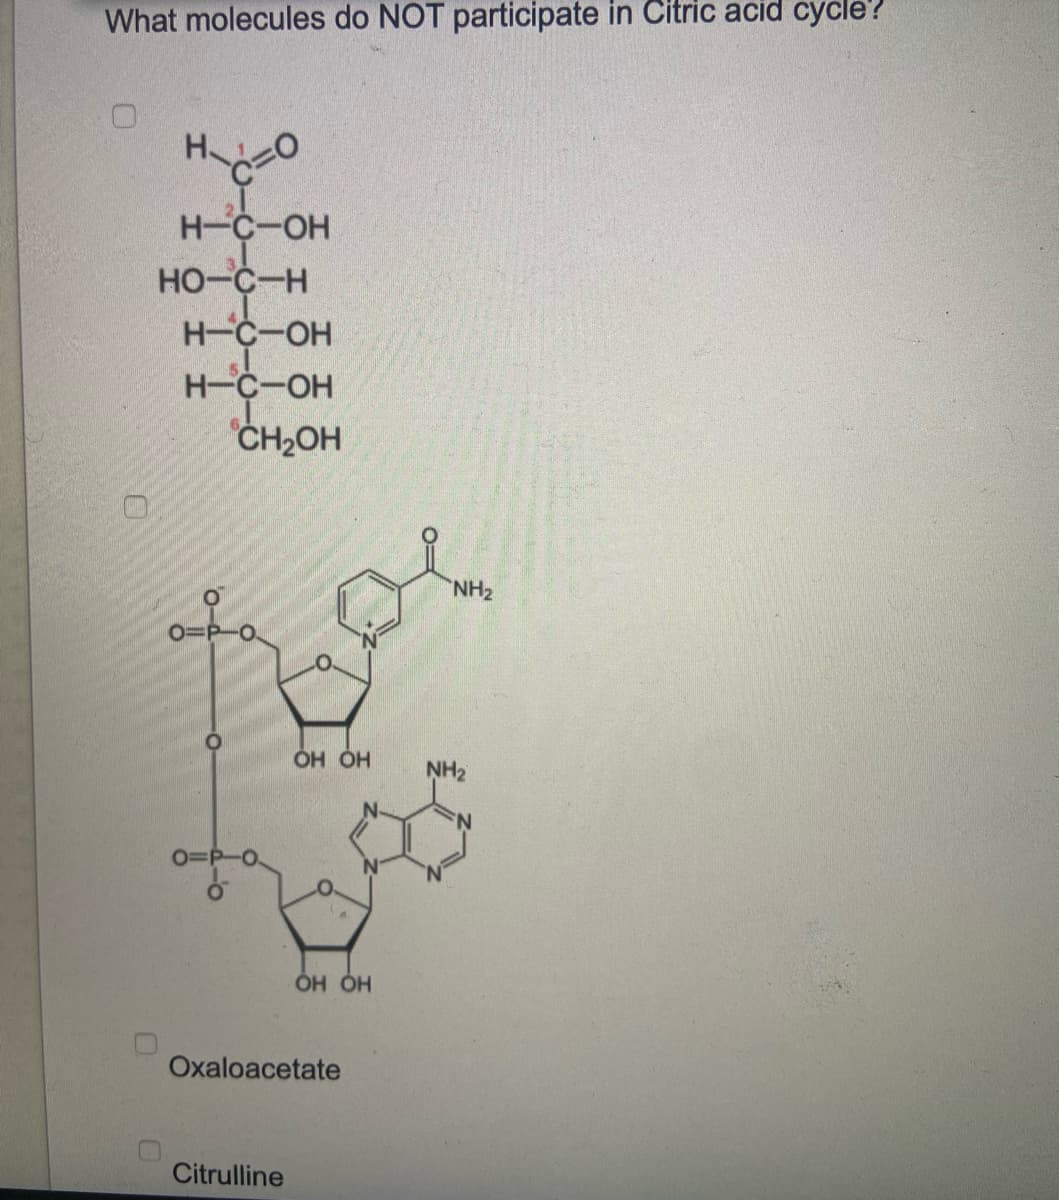 What molecules do NOT participate in Citric acid cycle?
на сто
HO
H-C-OH
HO-C-H
H-C-OH
H-C-OH
CH₂OH
0=P-0.
0=P-0.
ОН ОН
Citrulline
OH OH
Oxaloacetate
NH₂
NH₂